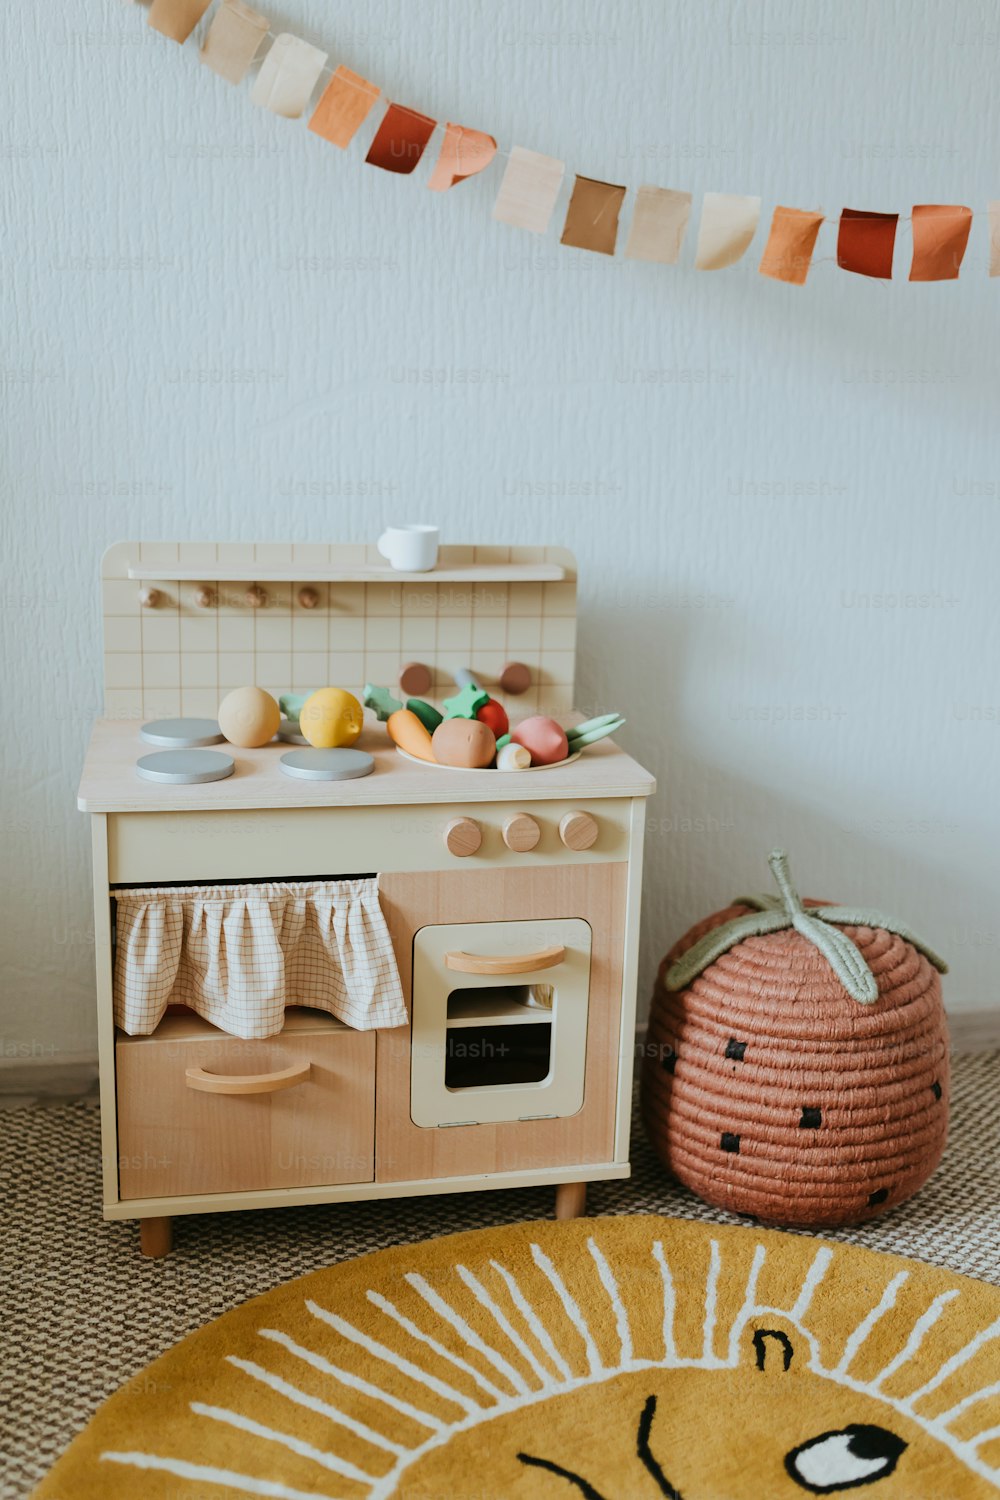 a wooden toy kitchen with a lion rug